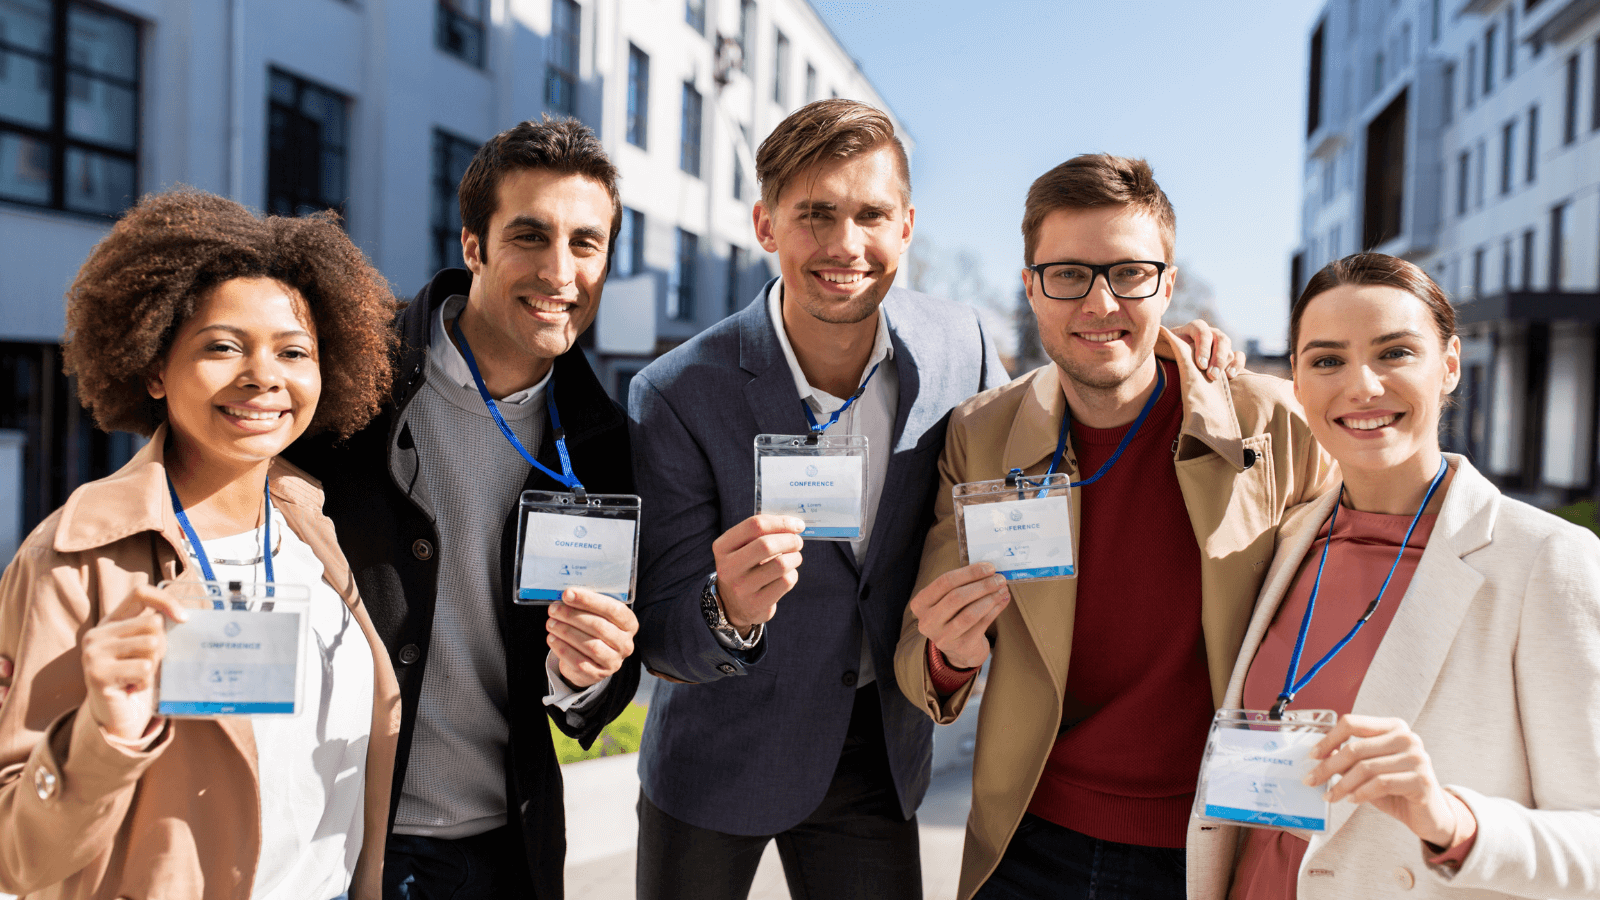 An International Group Of People With Conference Badges On City Streets